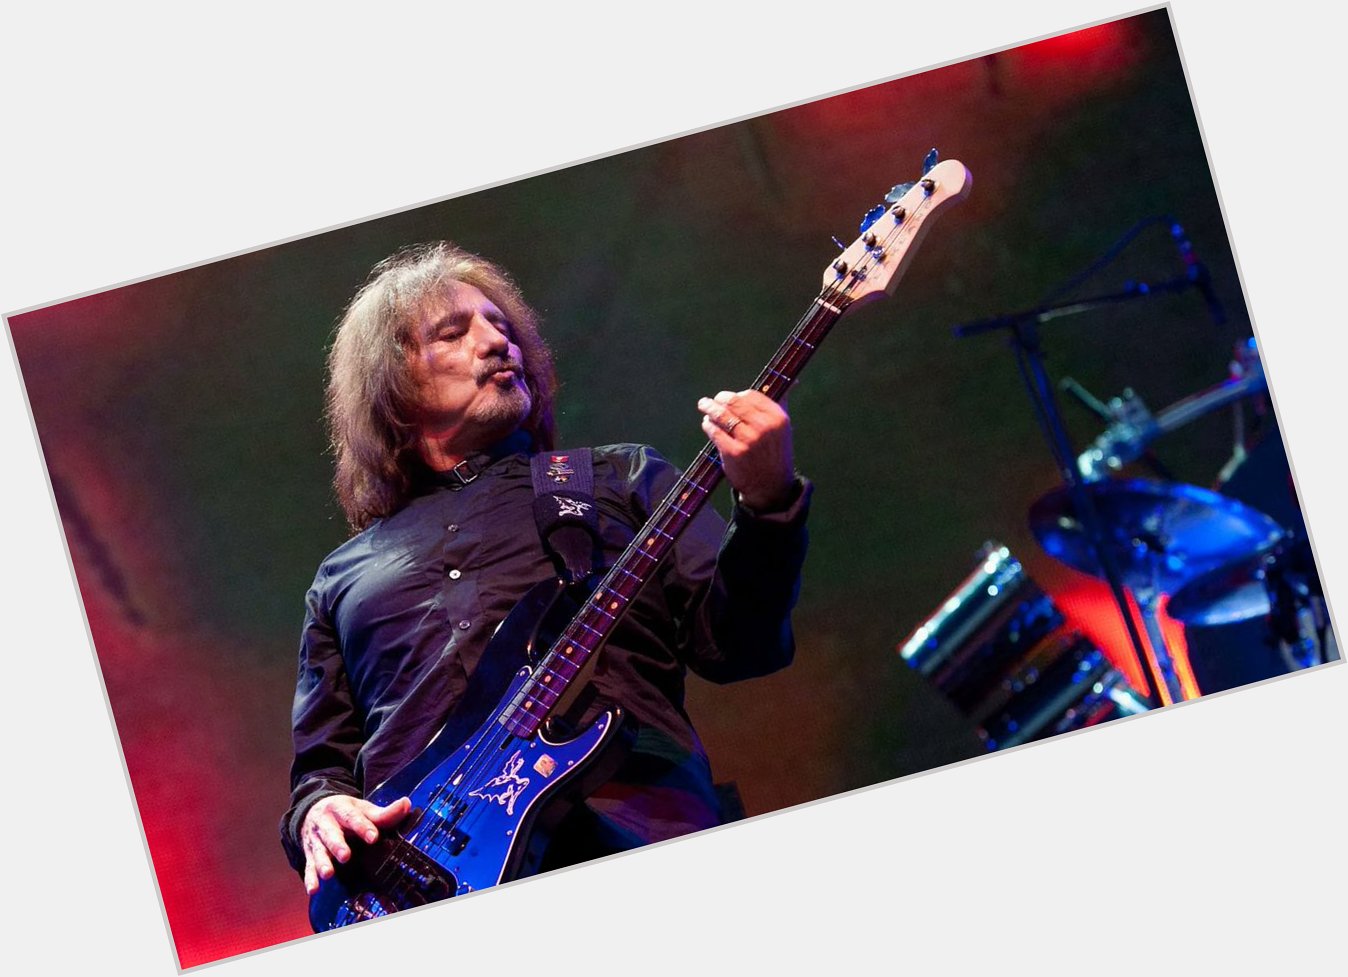 Happy Birthday Geezer Butler !  The man pounding that bass in Black Sabbath and wrote most of their songs !   